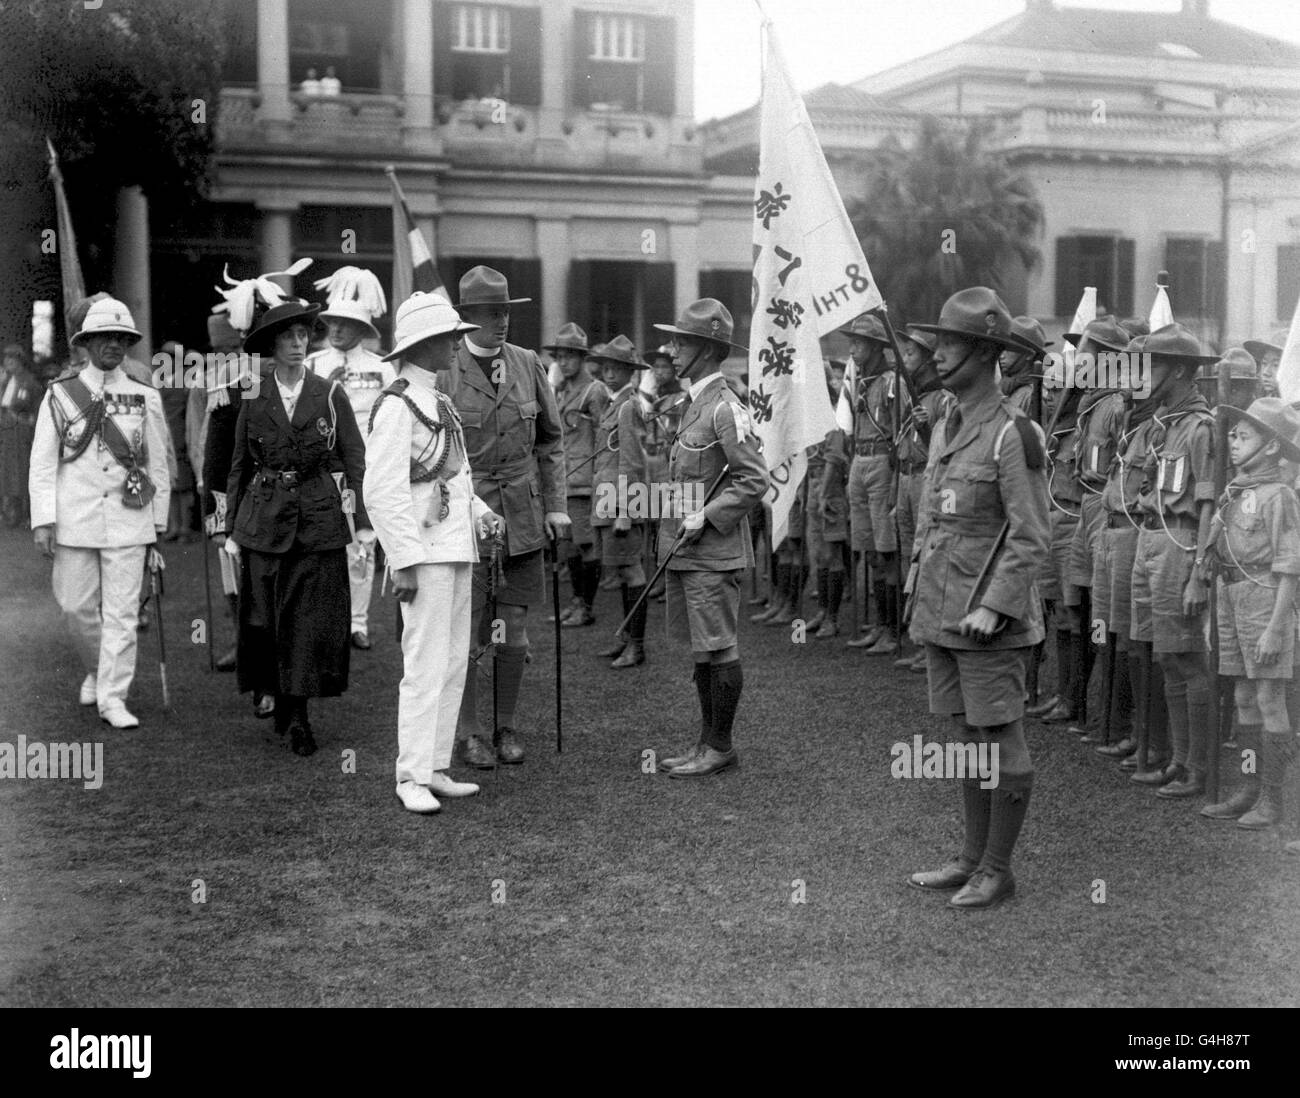 PA NEWS PHOTO 6/4/22 A LIBRARY PHOTO OF THE PRINCE OF WALES AT GOVERNMENT HOUSE IN HONG KONG WHERE HE WAS RECEIVED BY THE CHINESE BOY SCOUTS AND GIRL GUIDES Stock Photo